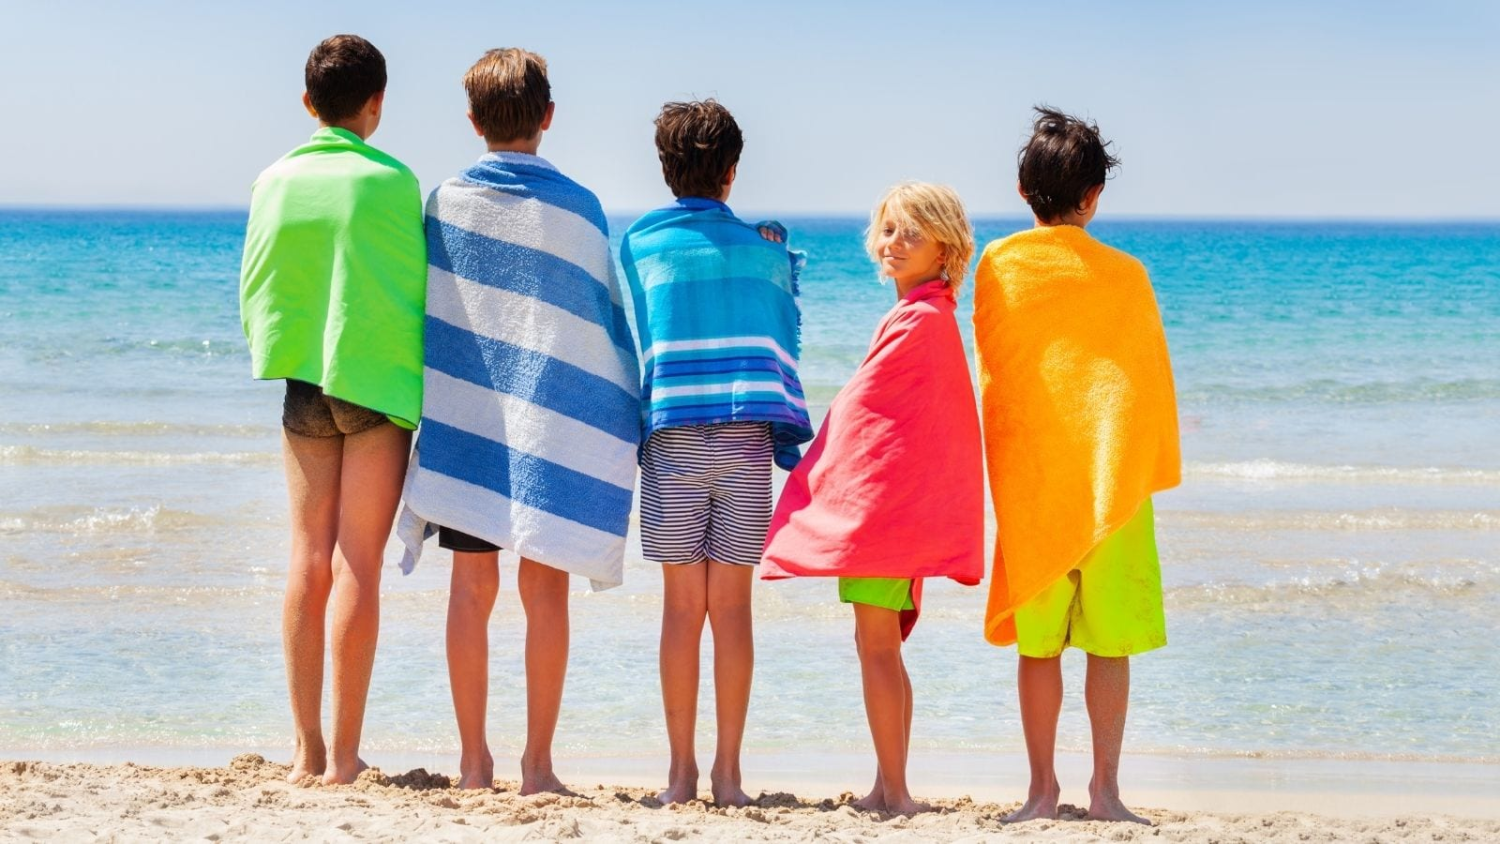 Why should we wholesale beach towels be on your sell list